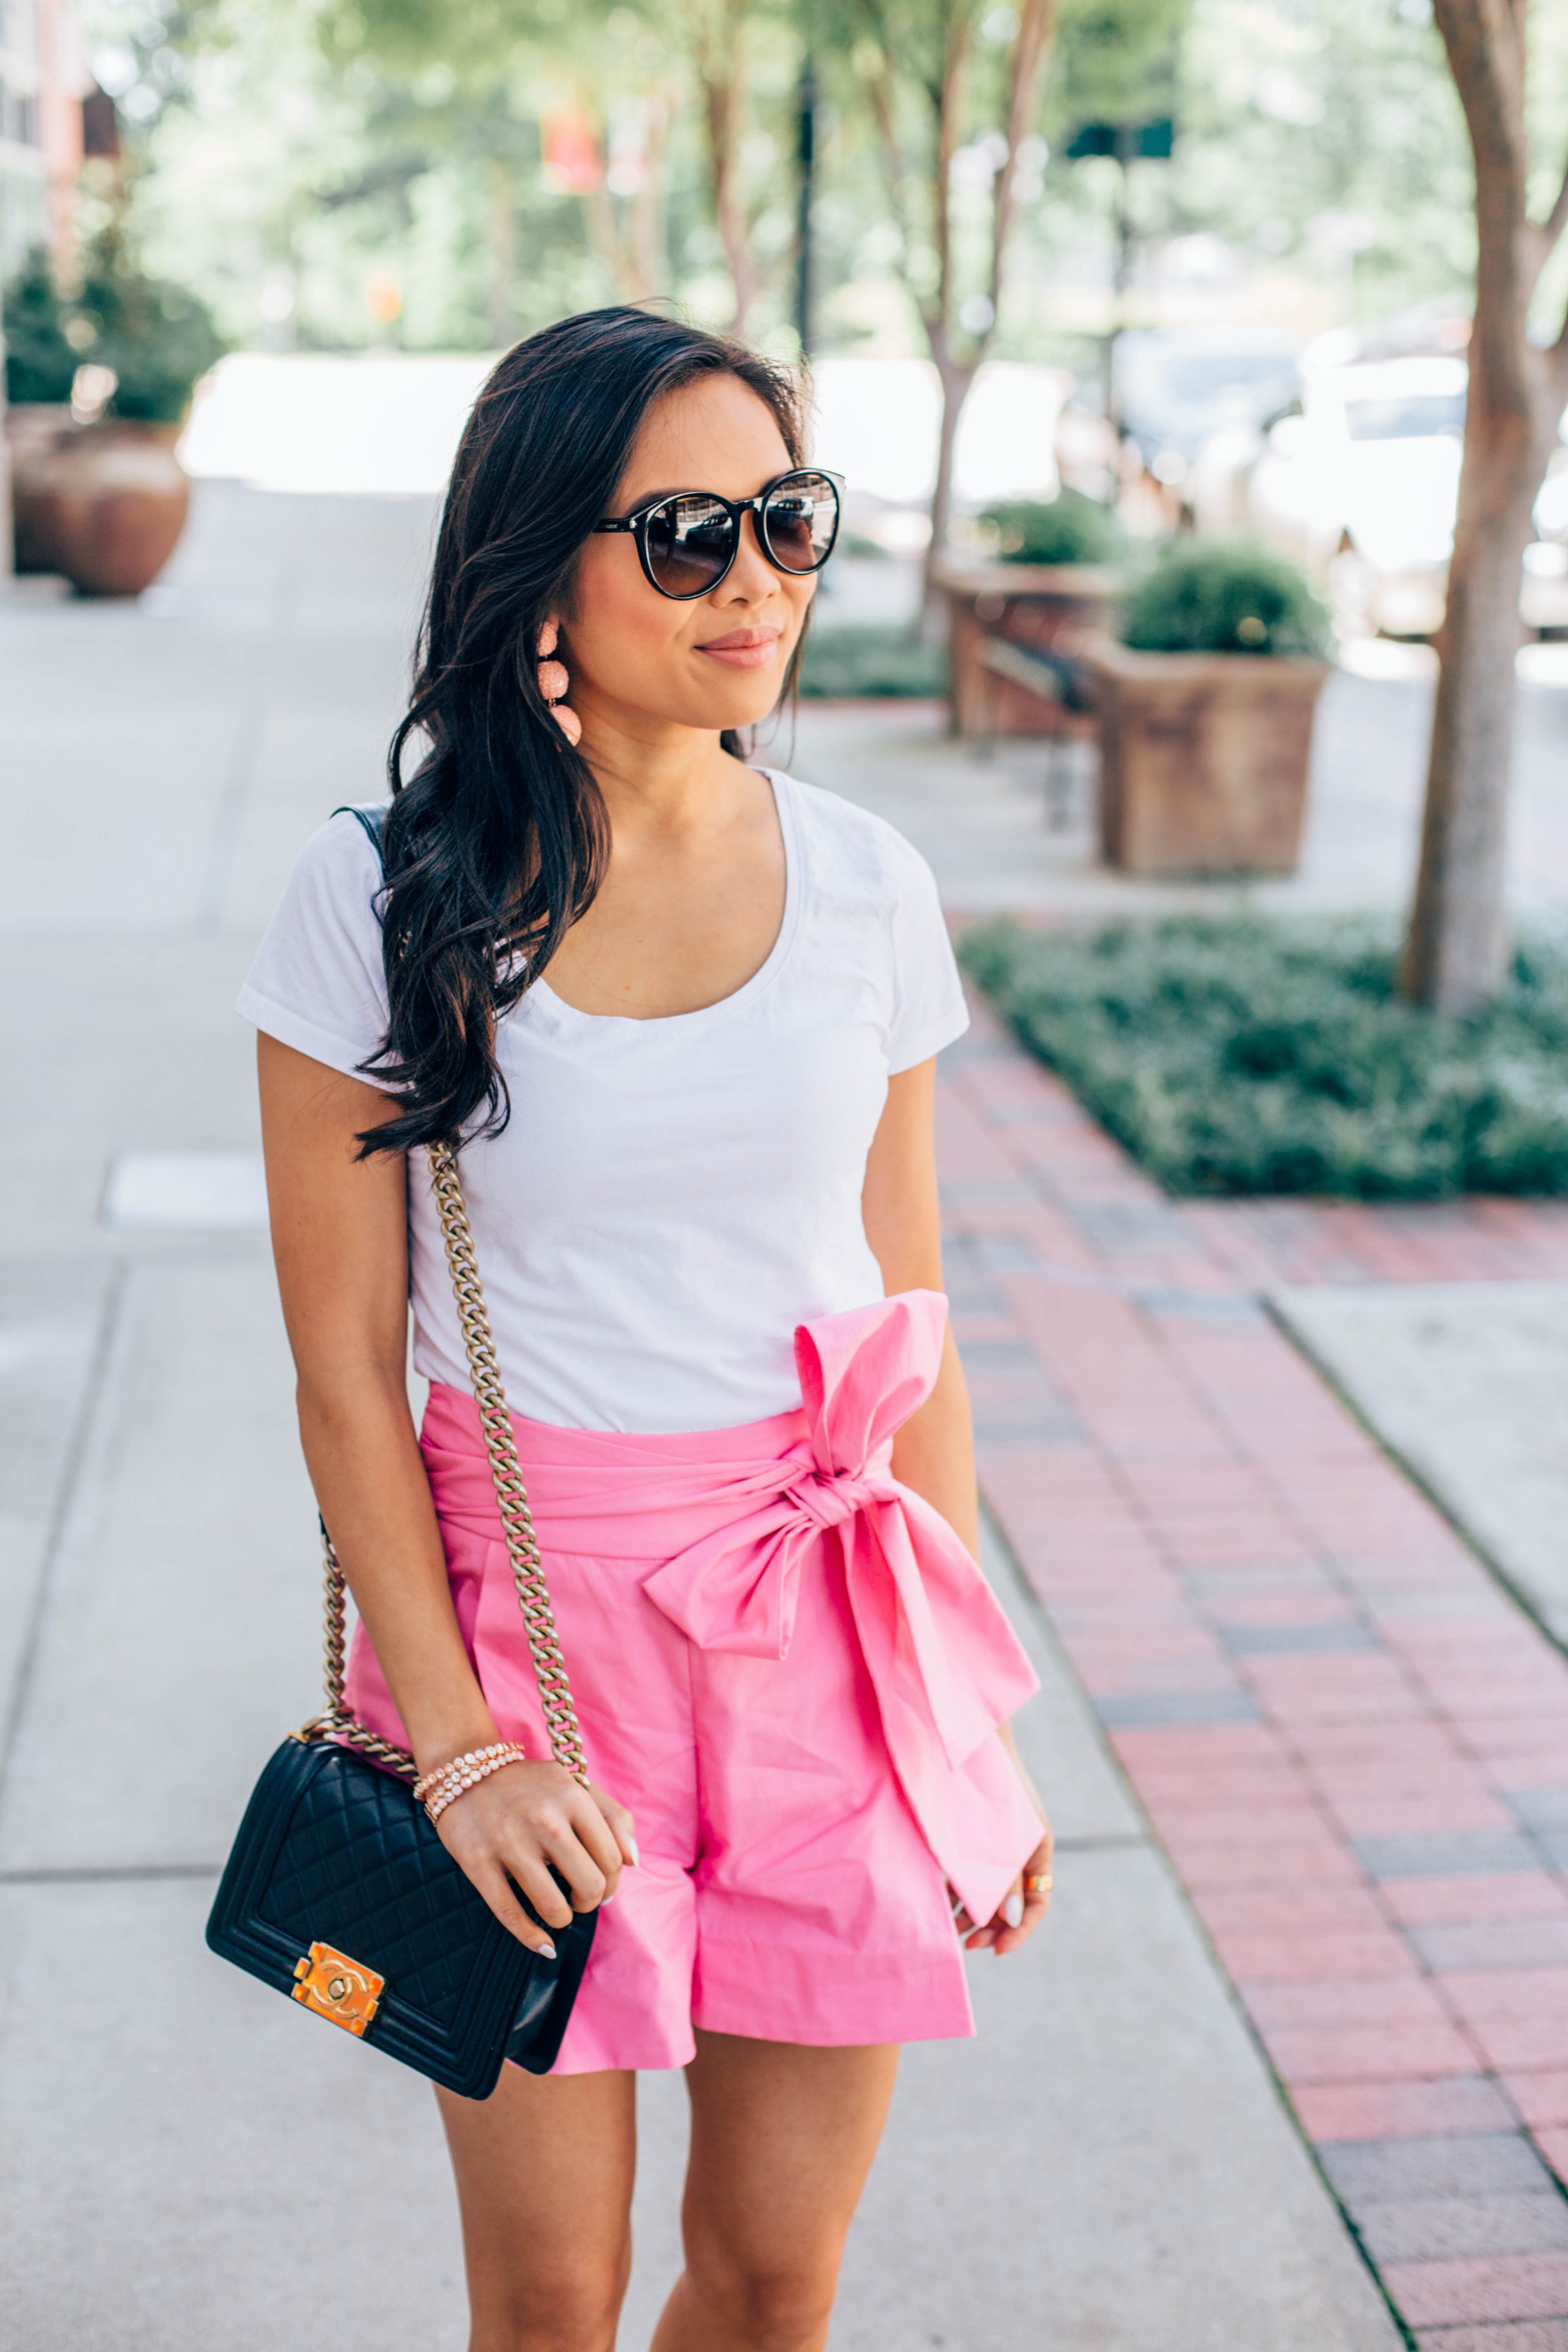 Put a Bow on It :: Tie Waist Shorts + White Tee - Color & Chic